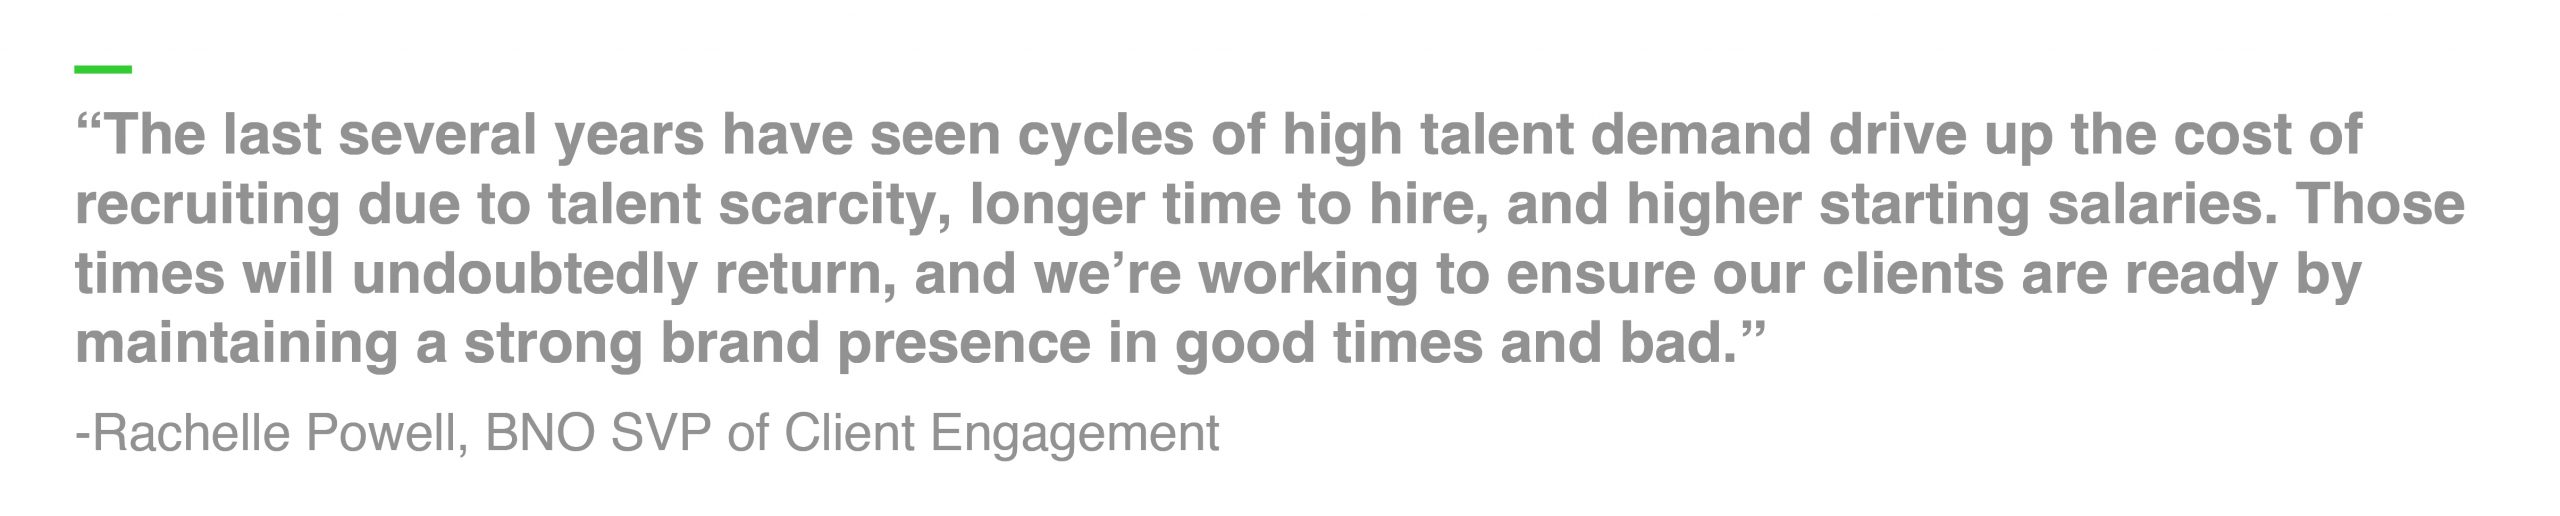 “The last several years have seen cycles of high talent demand drive up the cost of recruiting due to talent scarcity, longer time to hire, and higher starting salaries. Those times will undoubtedly return, and we’re working to ensure our clients are ready by maintaining a strong brand presence in good times and bad.” -Rachelle Powell, BNO SVP of Client Engagement 